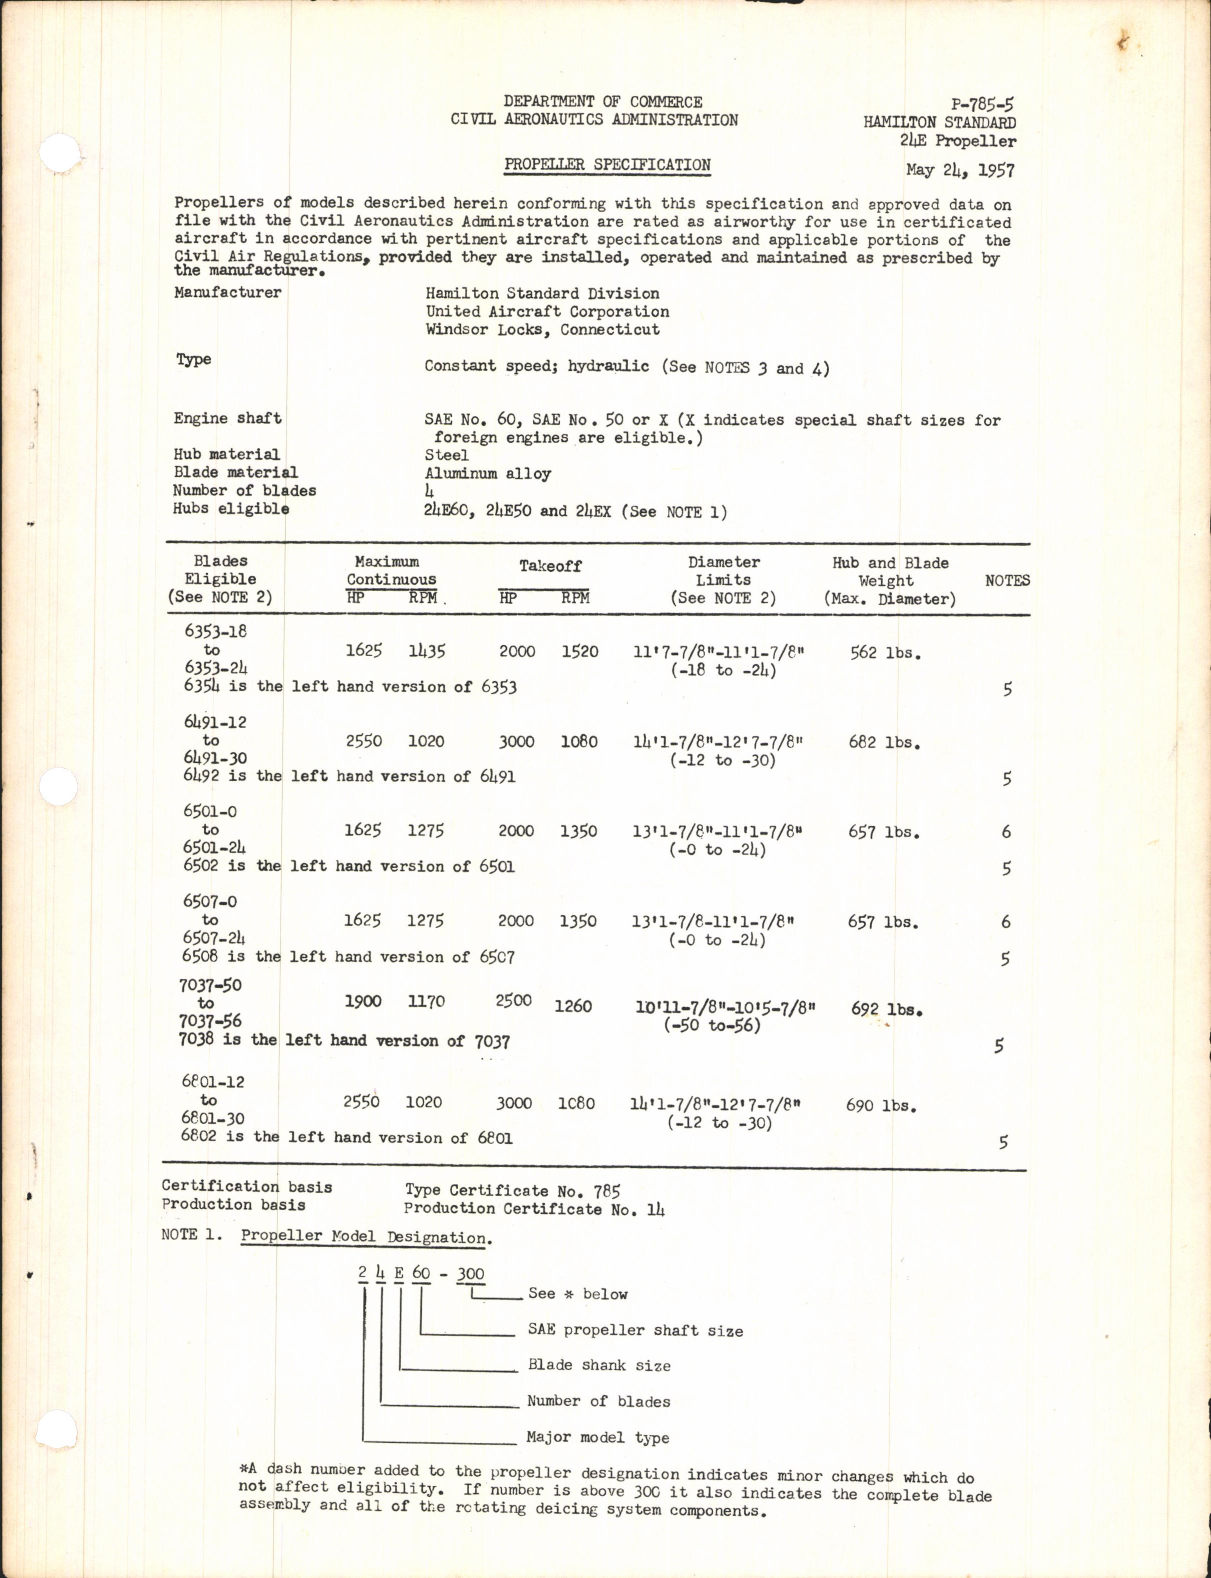 Sample page 1 from AirCorps Library document: Propeller Specification for 24E Propellers